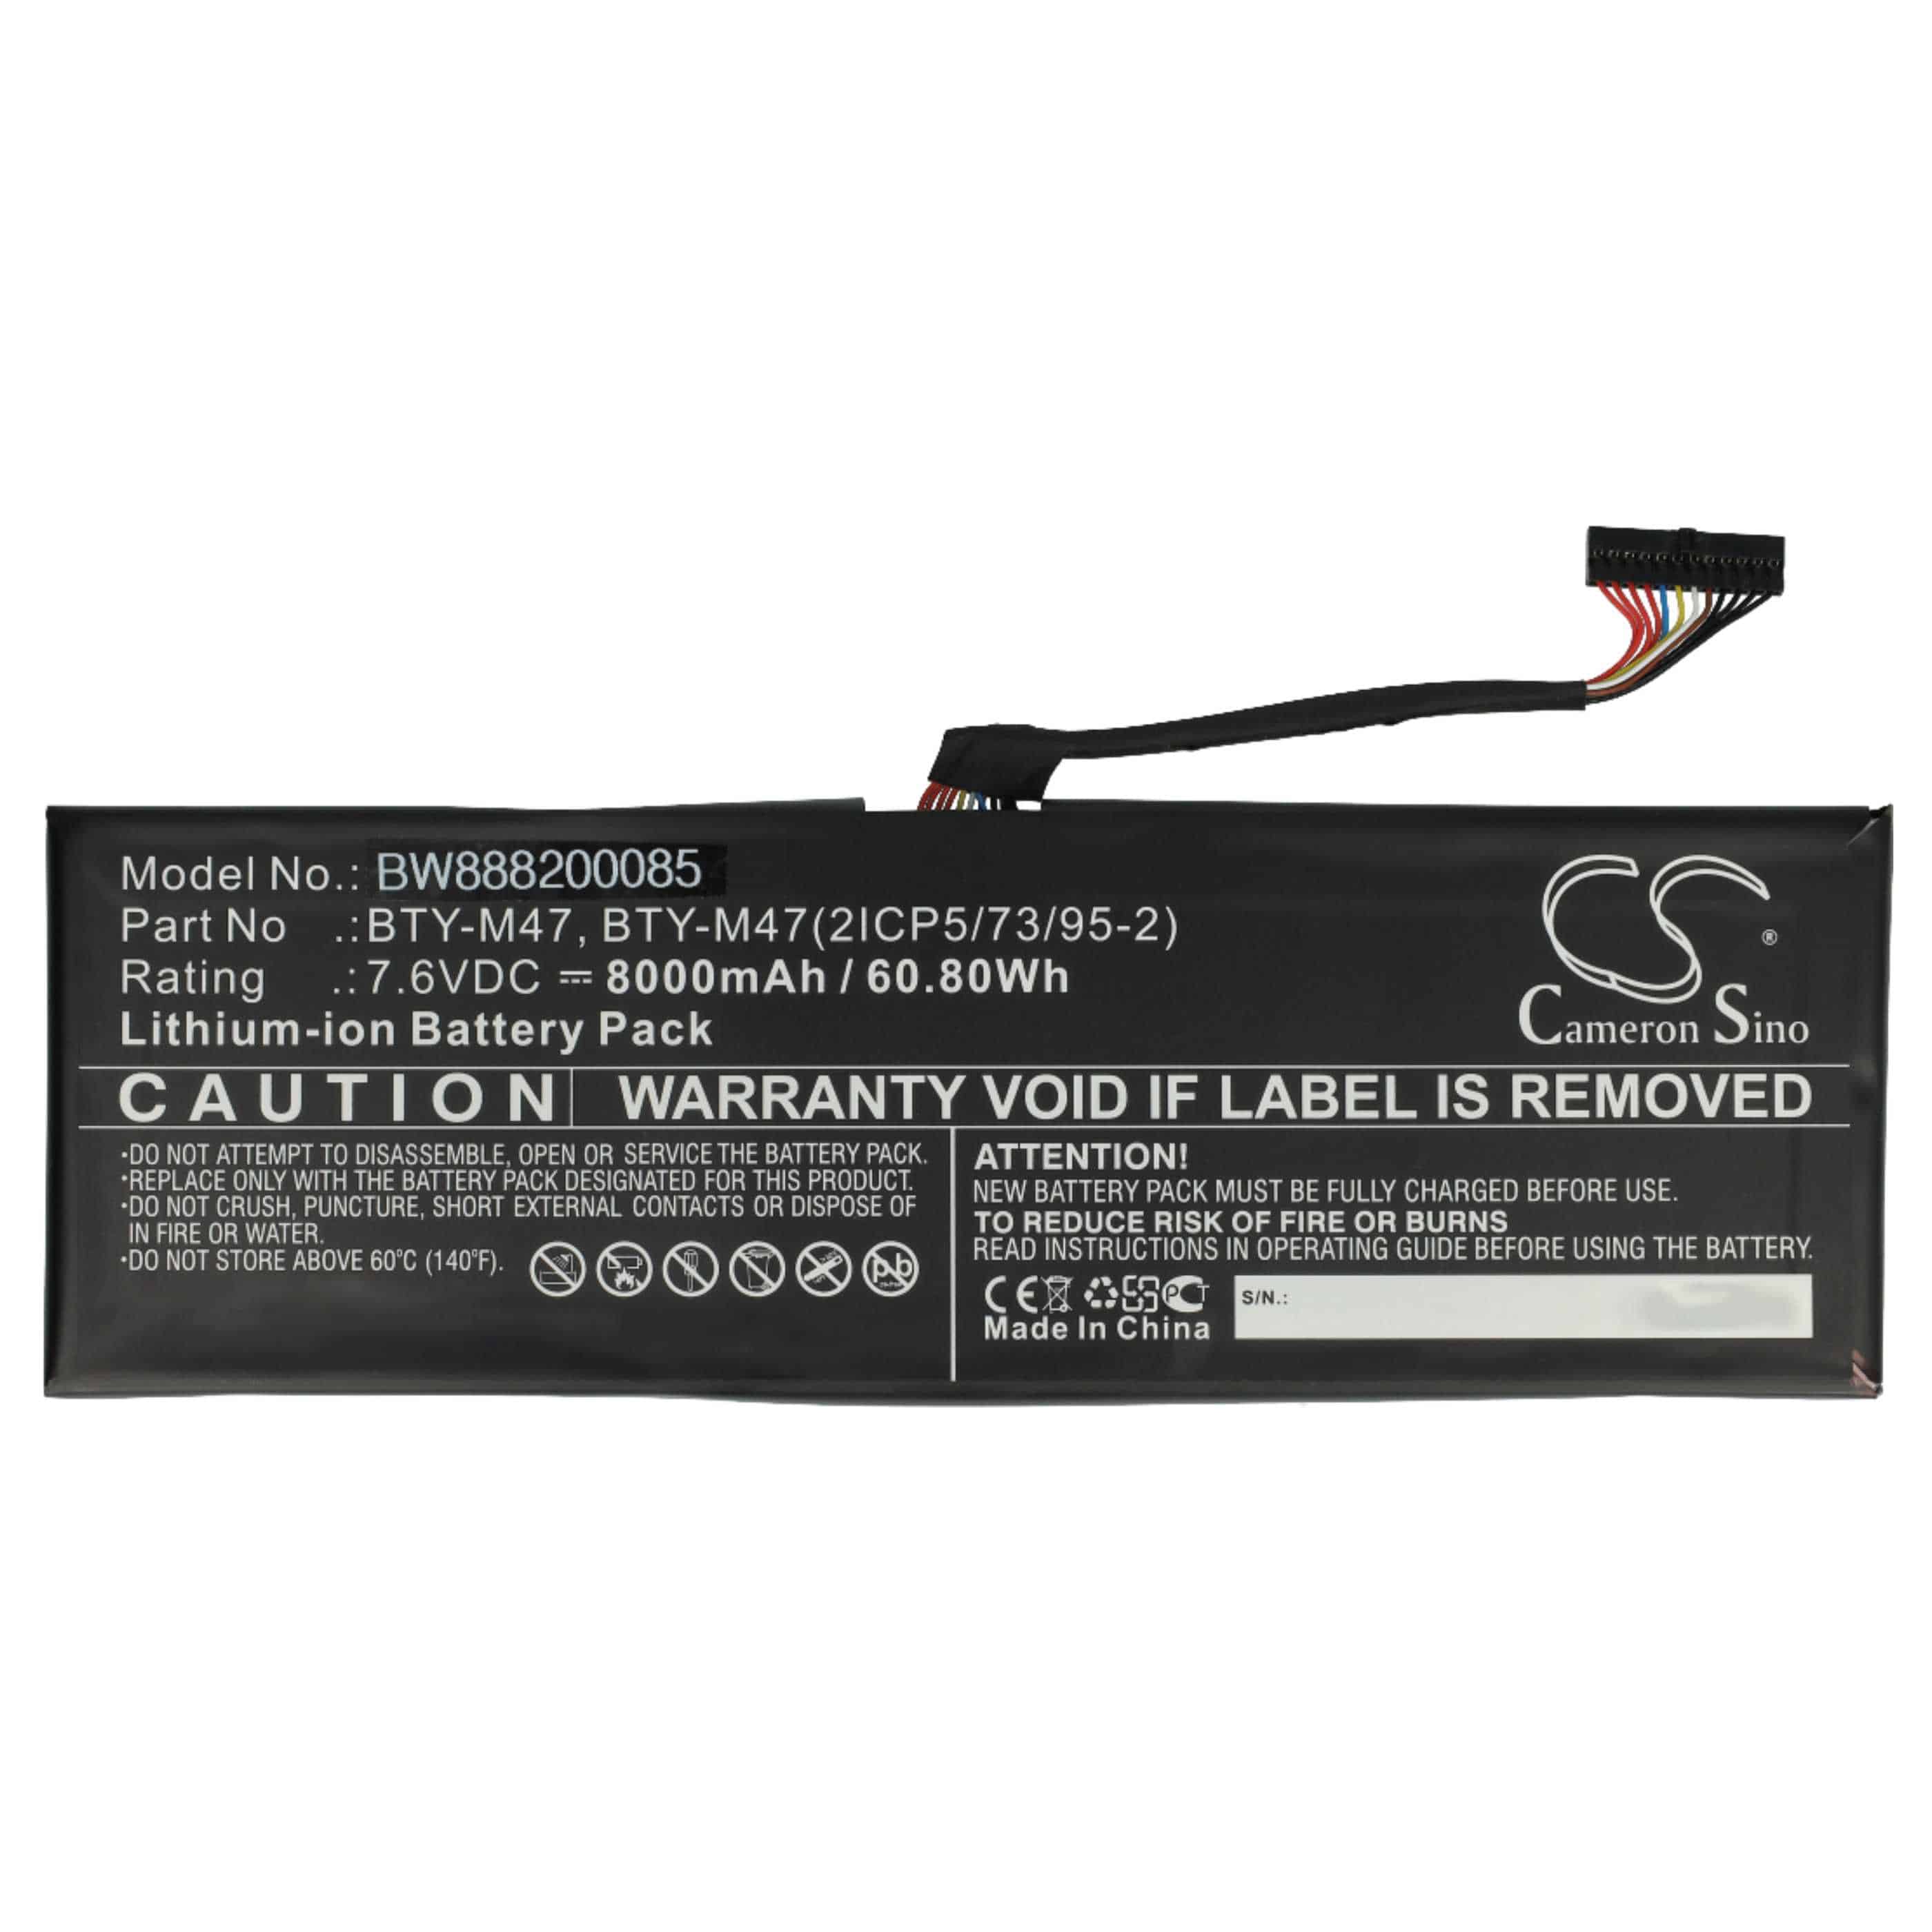 Notebook Battery Replacement for MSI BTY-M47, BTY-M47(2ICP5/73/95-2) - 8060mAh 7.6V Li-Ion, black